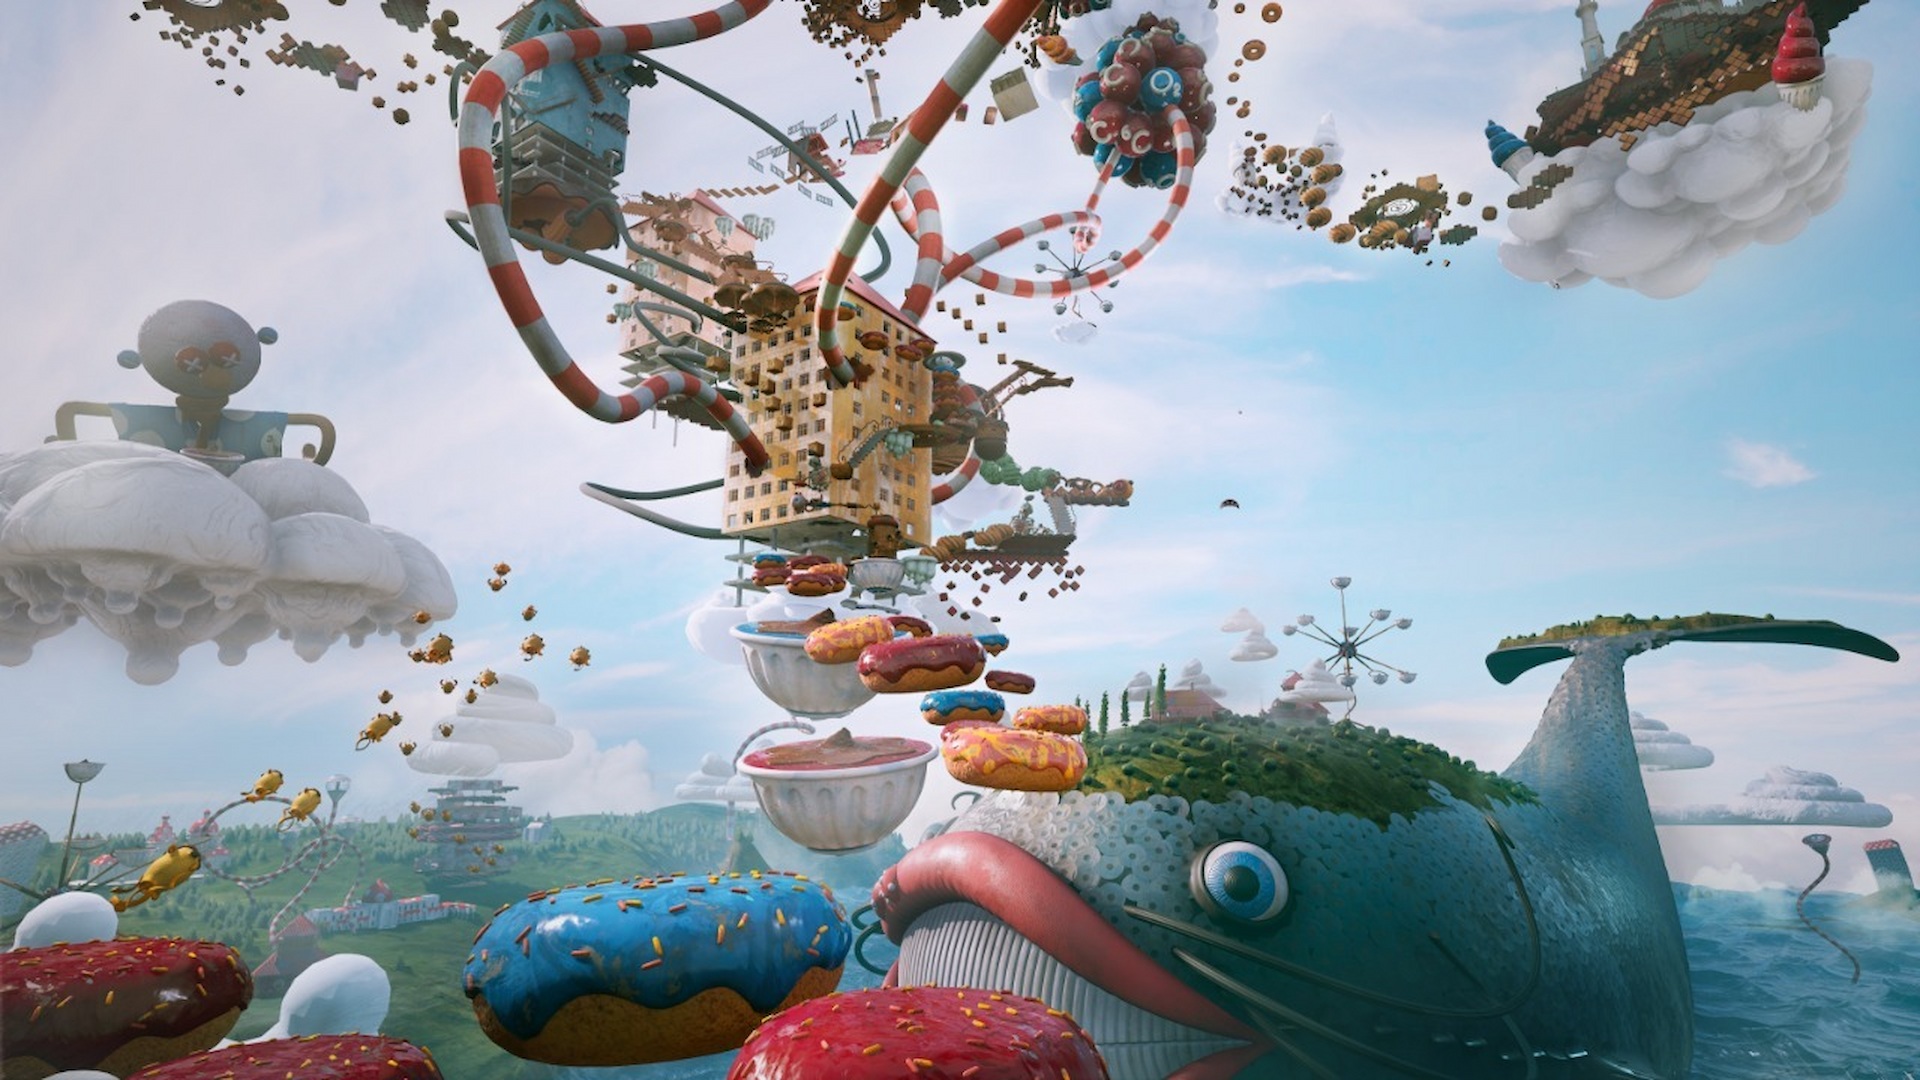 Atomic Heart DLC screenshot showing the surreal Limbo landscape, including donut platforms and giant whales